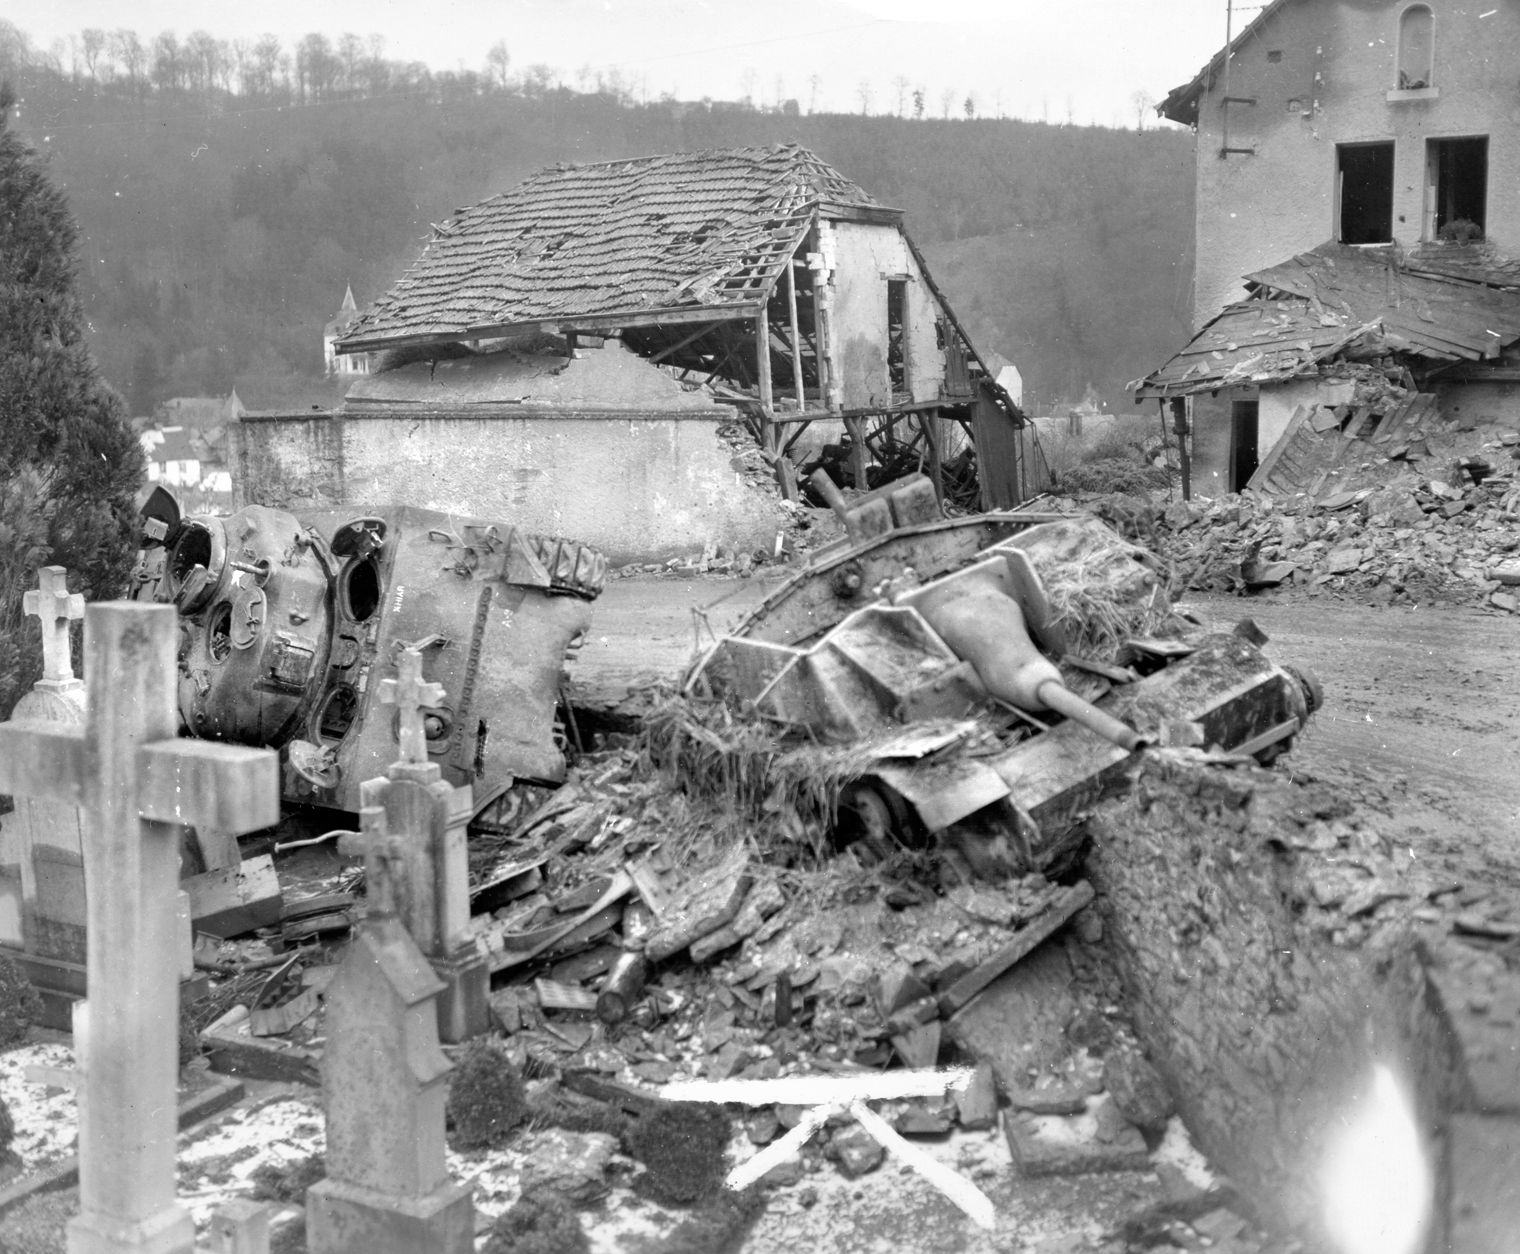 The hulks of a knocked-out German Sturmgeschutz III self-propelled assault gun and an American M4 Sherman tank from the 707th Tank Battalion bear mute testimony to the ferocity of the fighting adjacent to a cemetery on the outskirts of the town of Clervaux, Luxembourg. 